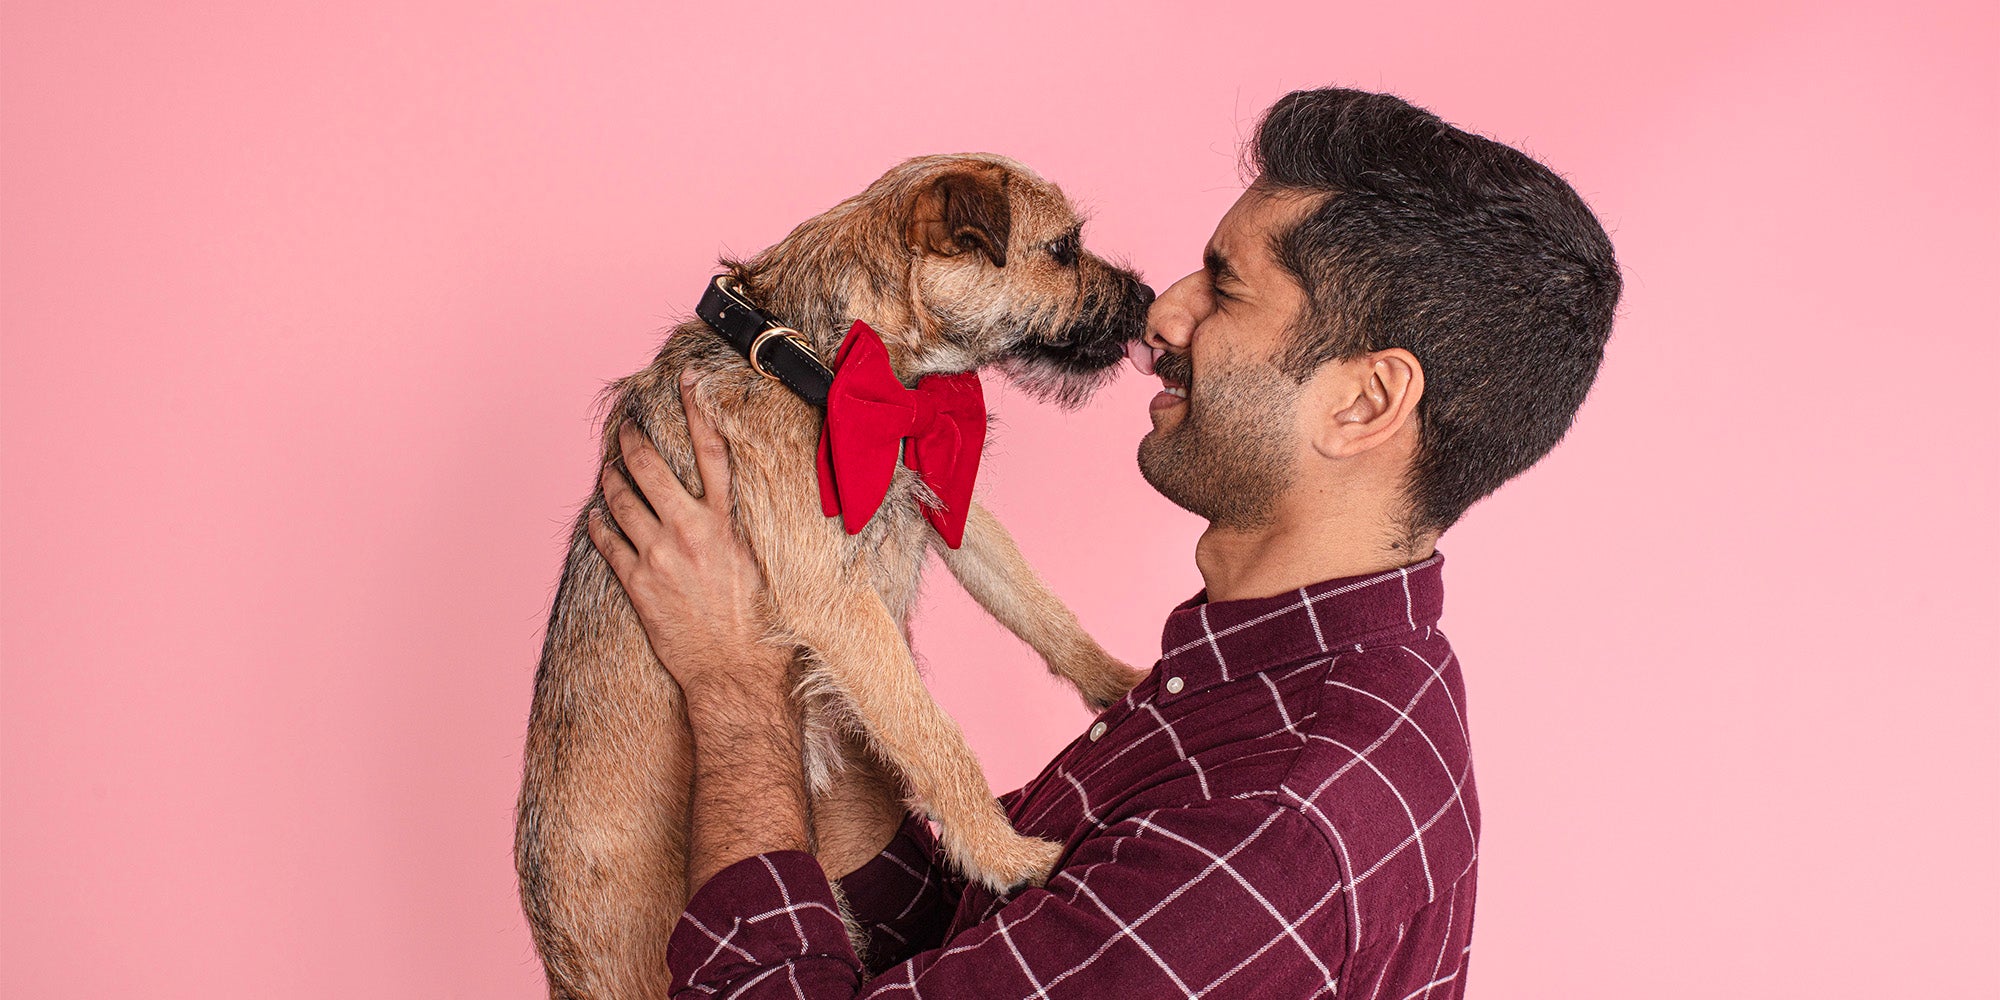 A dark-haired man in a red check shirt, holding  and looking at his golden short-haired dog in a red bow tie, against a pink background